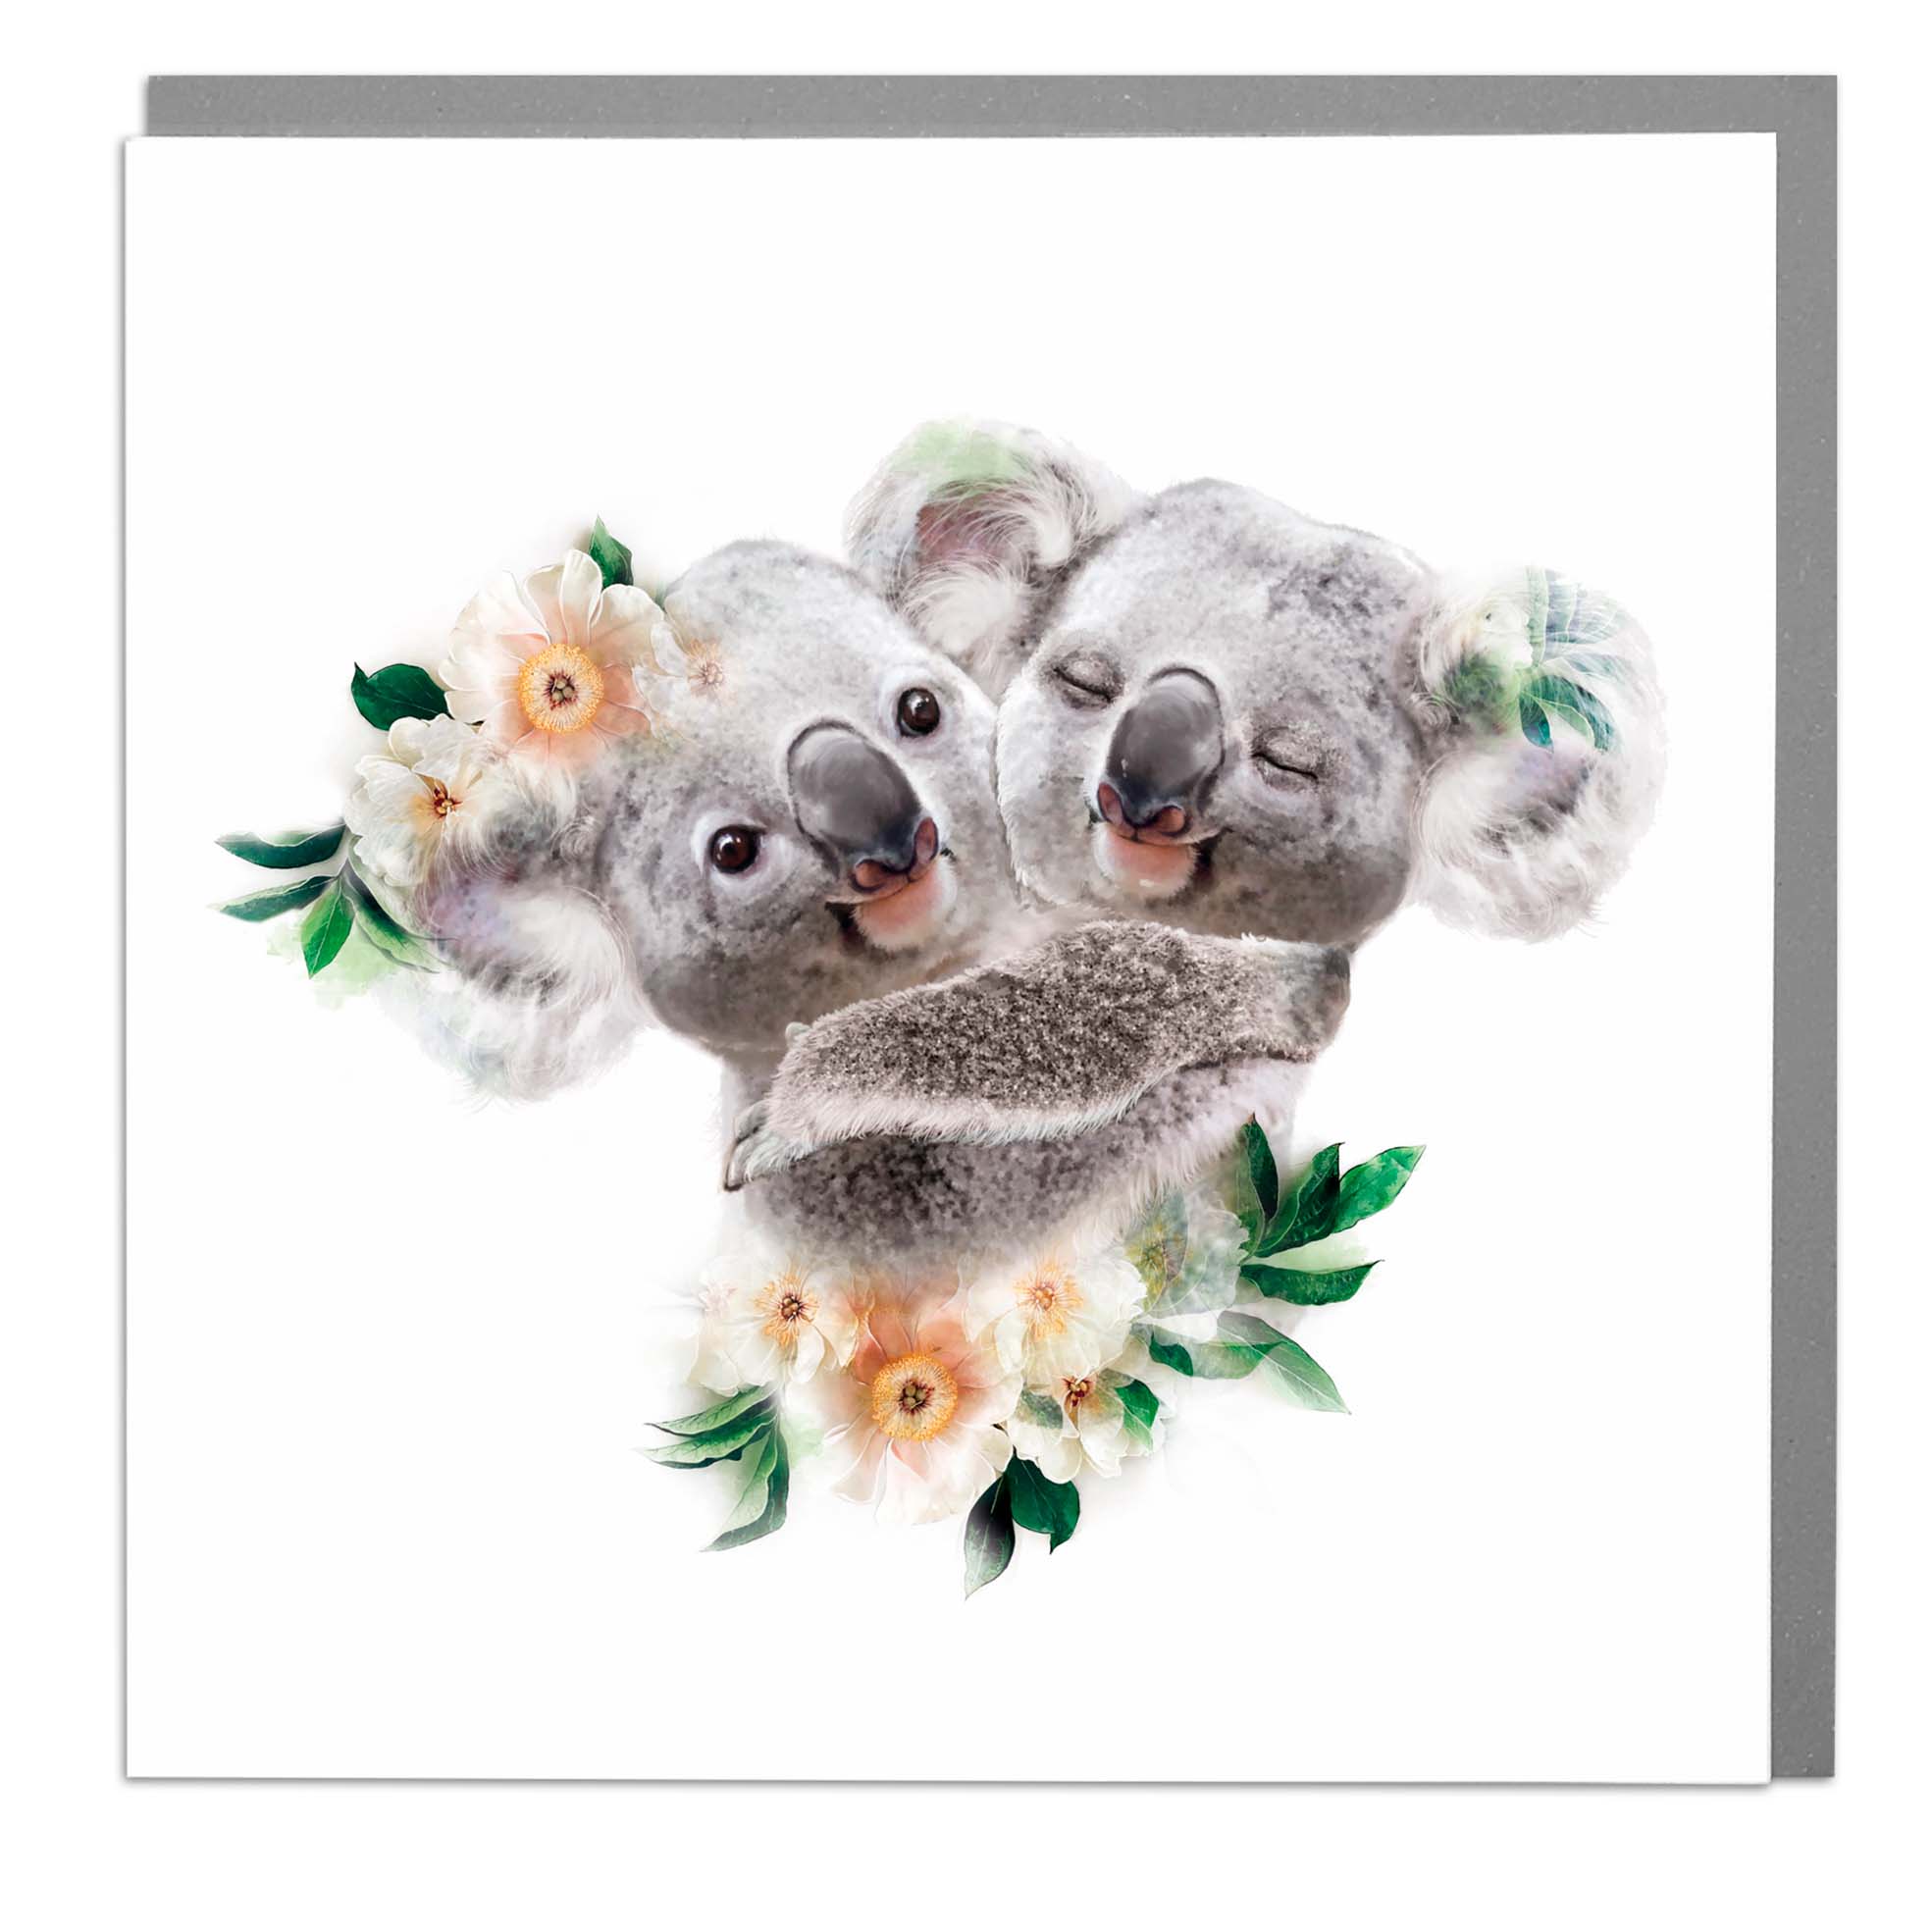 Hugging Koalas Floral Photographic Art Card from Penny Black